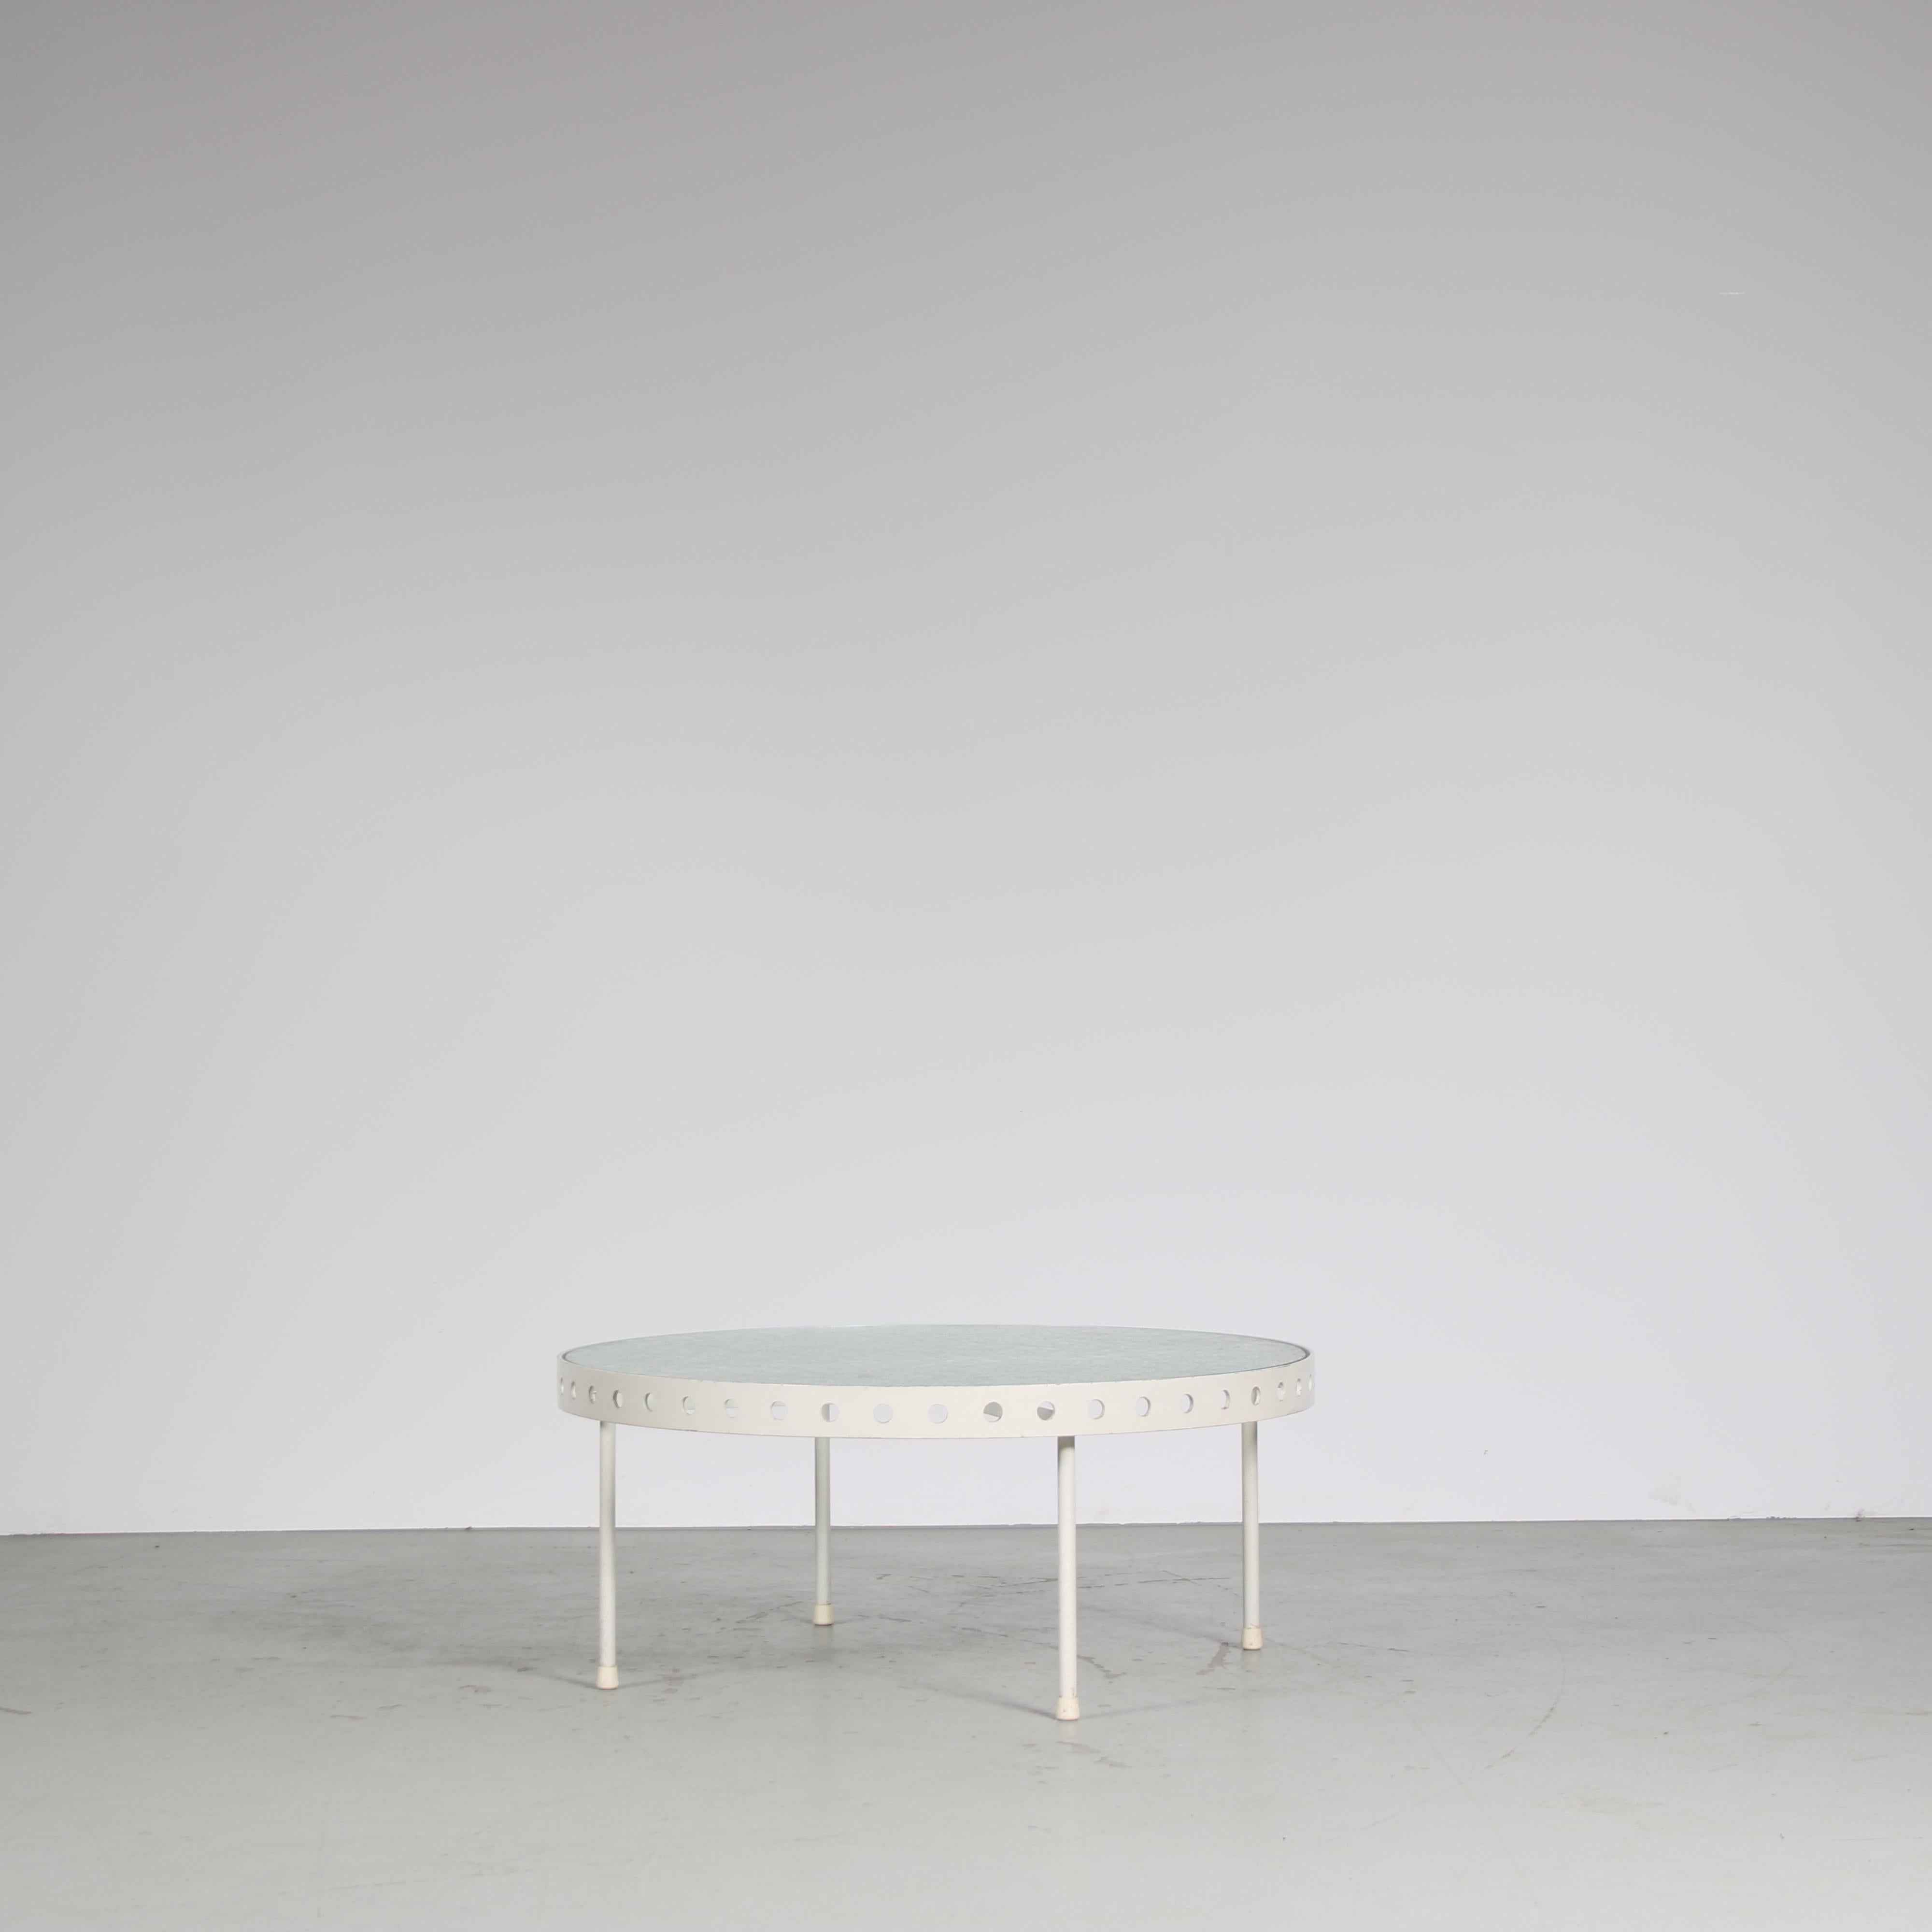 An eye-catching coffee table designed by Janni van Pelt, manufactured by MyHome the Netherlands around 1950.

This high quality piece features a white lacquered metal base with a round blurred glass top. The metal base has four tubular legs holding